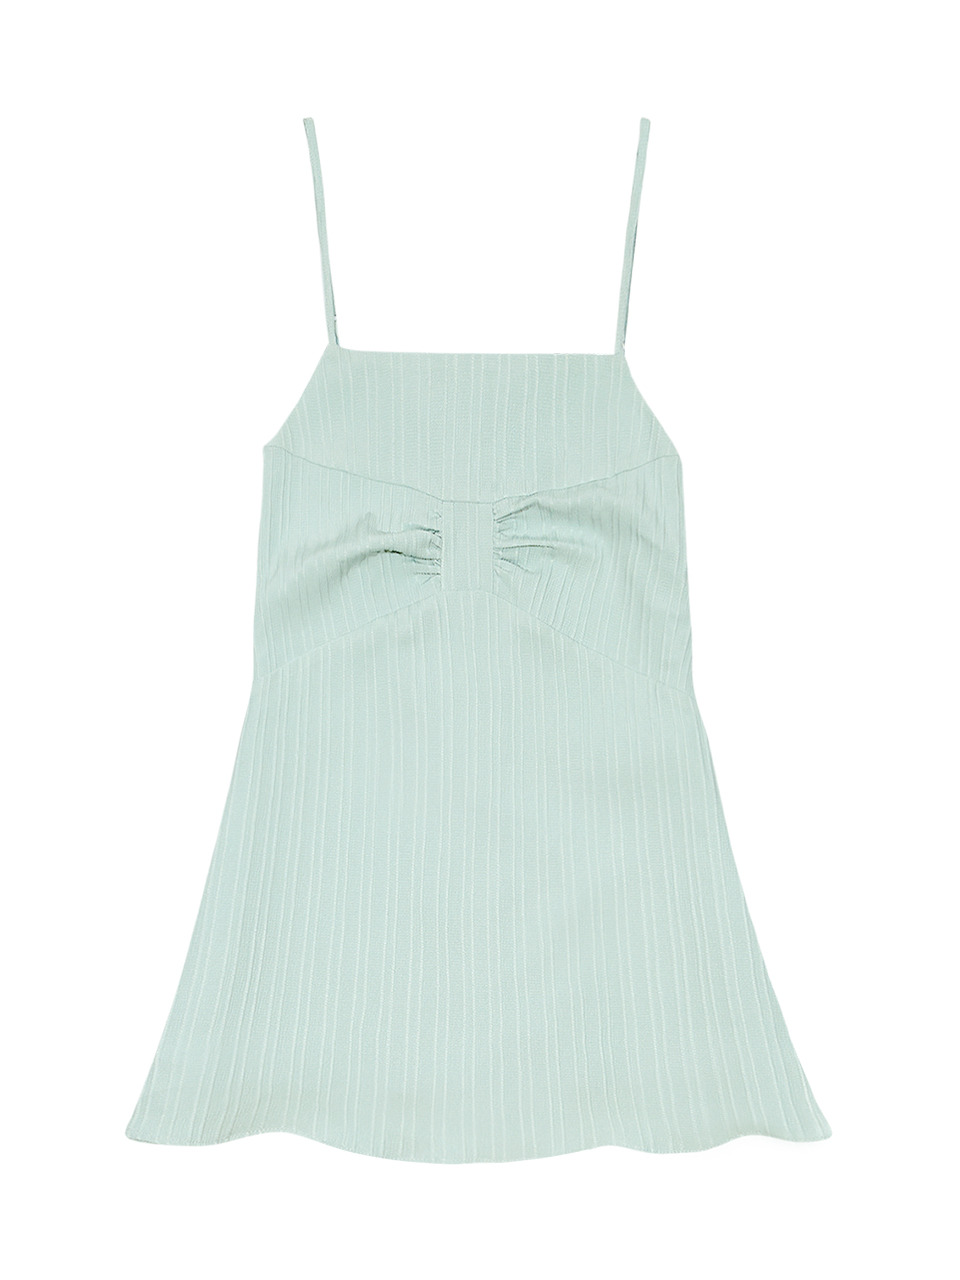 BLOOMING RIBBON ONE-PIECE (MINT)